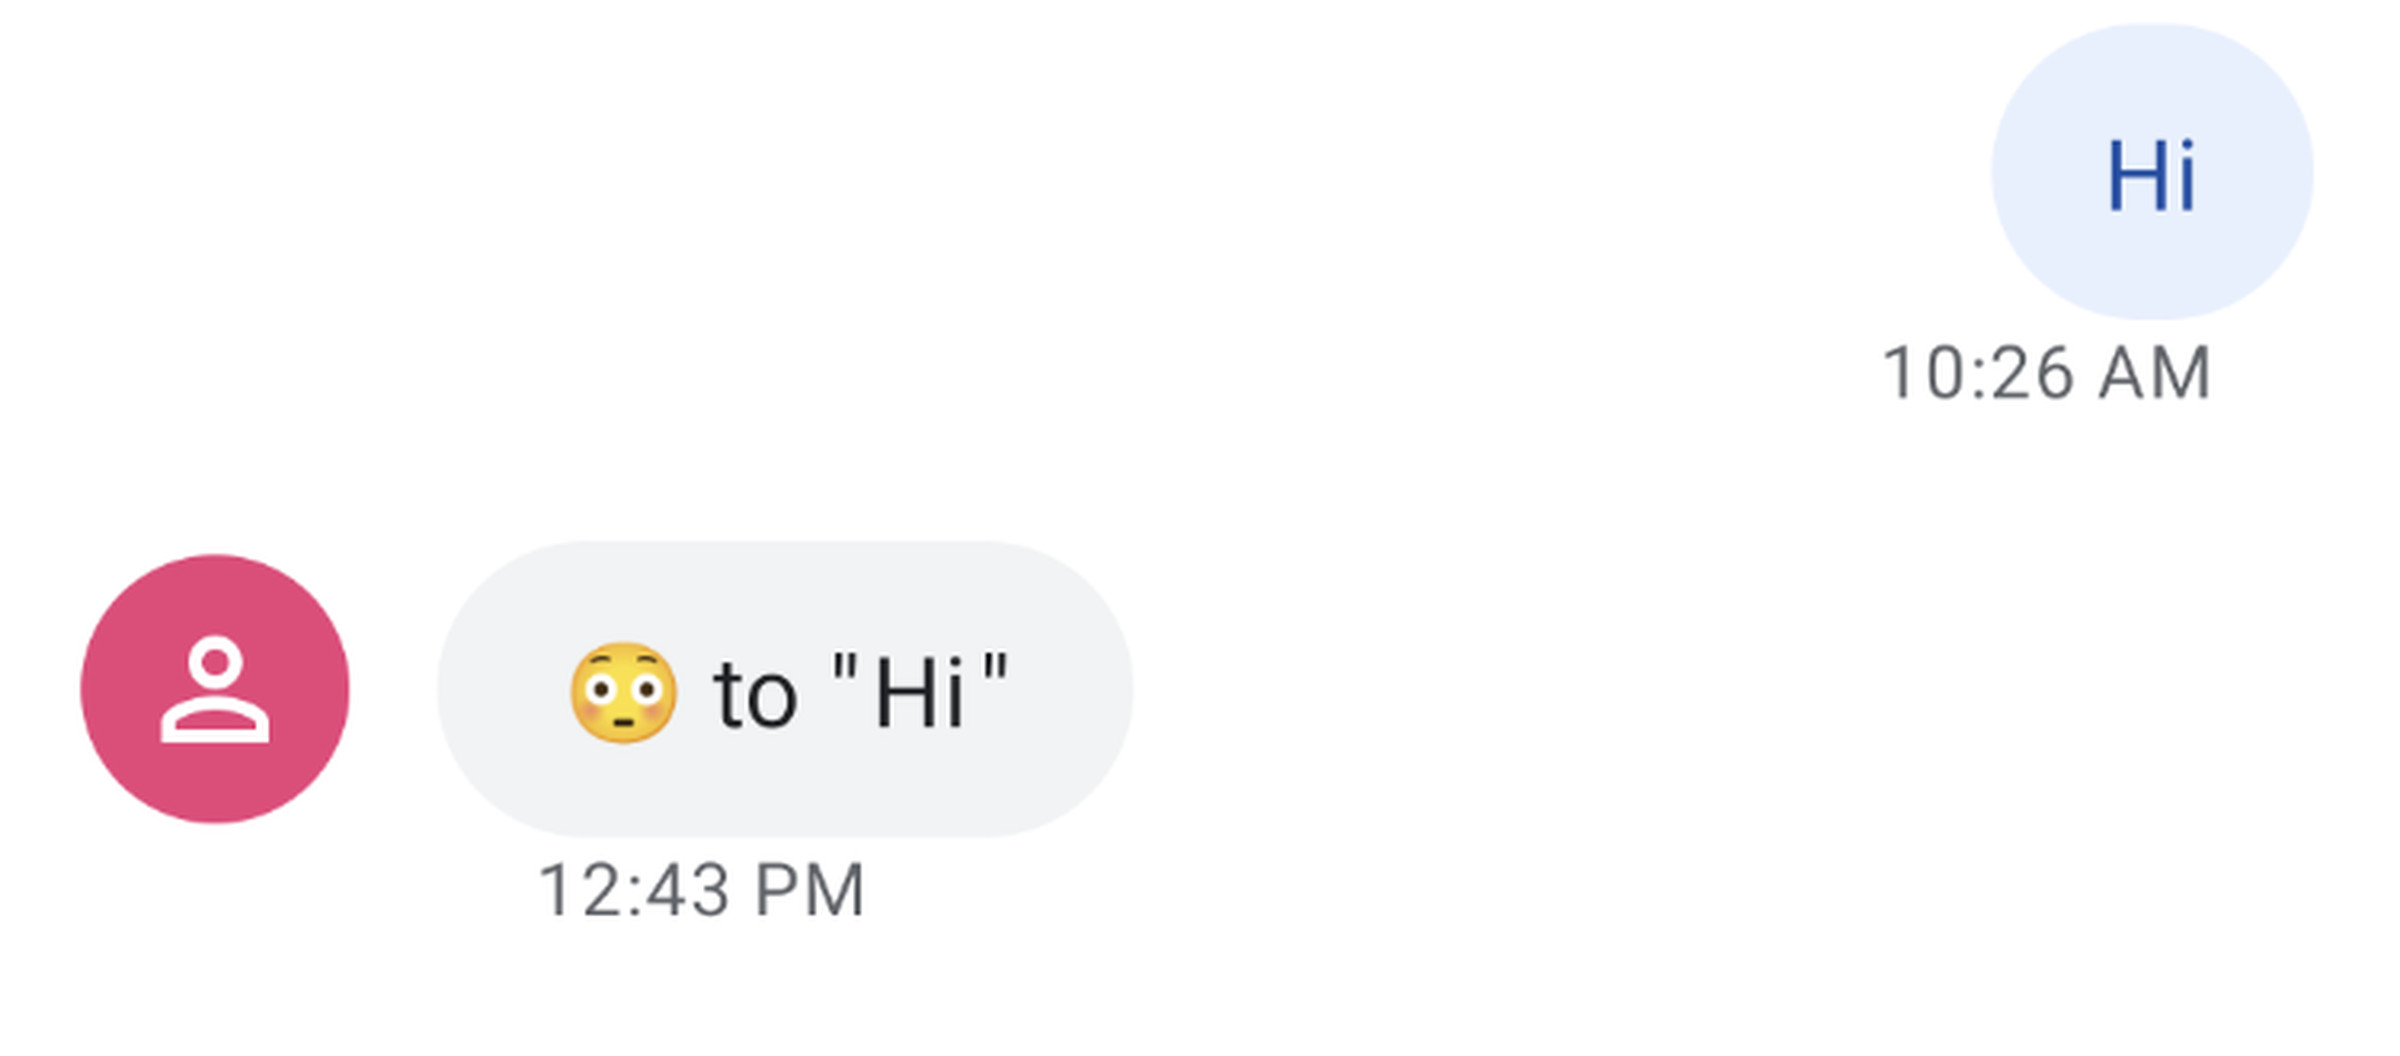 Screenshot of a text message conversation. One message says “Hi,” and a reply says “face with wide open eyes emoji to ‘Hi.’”